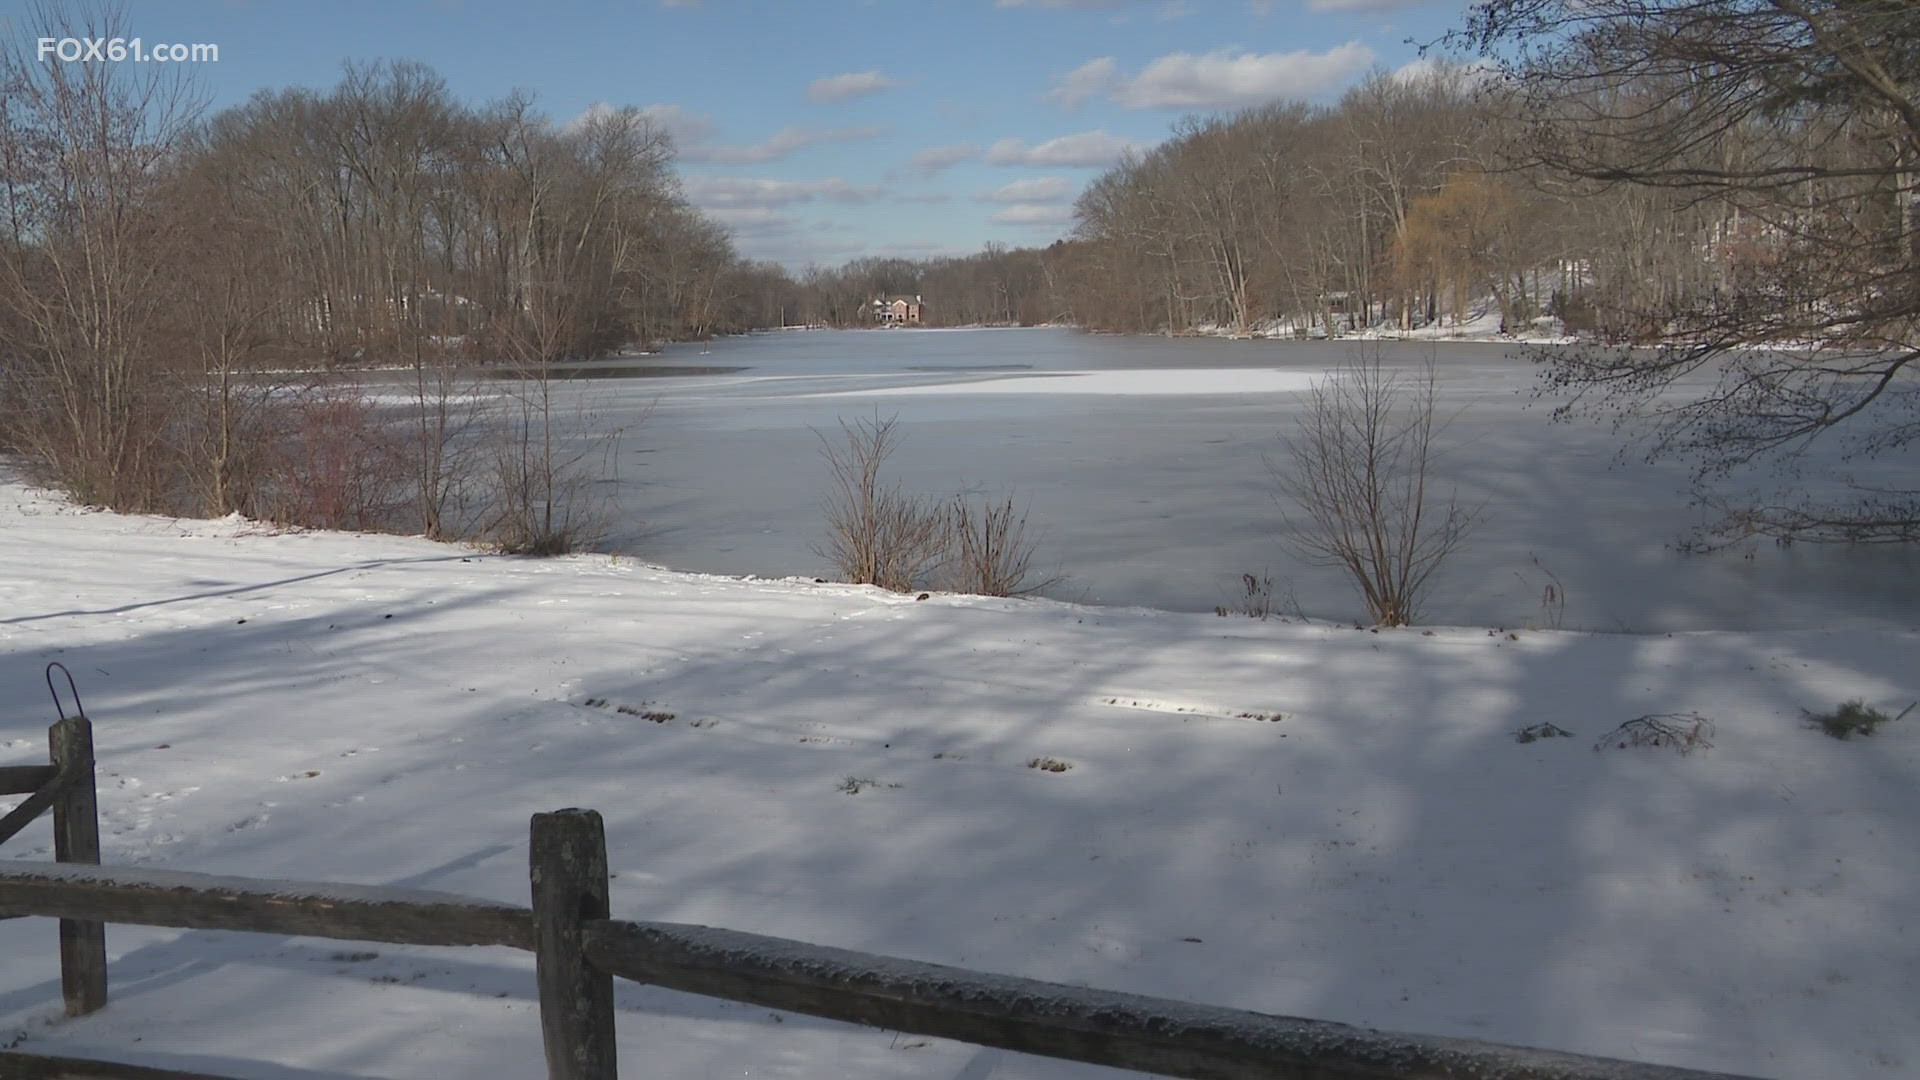 The ice is not thick enough on most ponds and lakes in Connecticut, as temperatures have been too warm up until now.